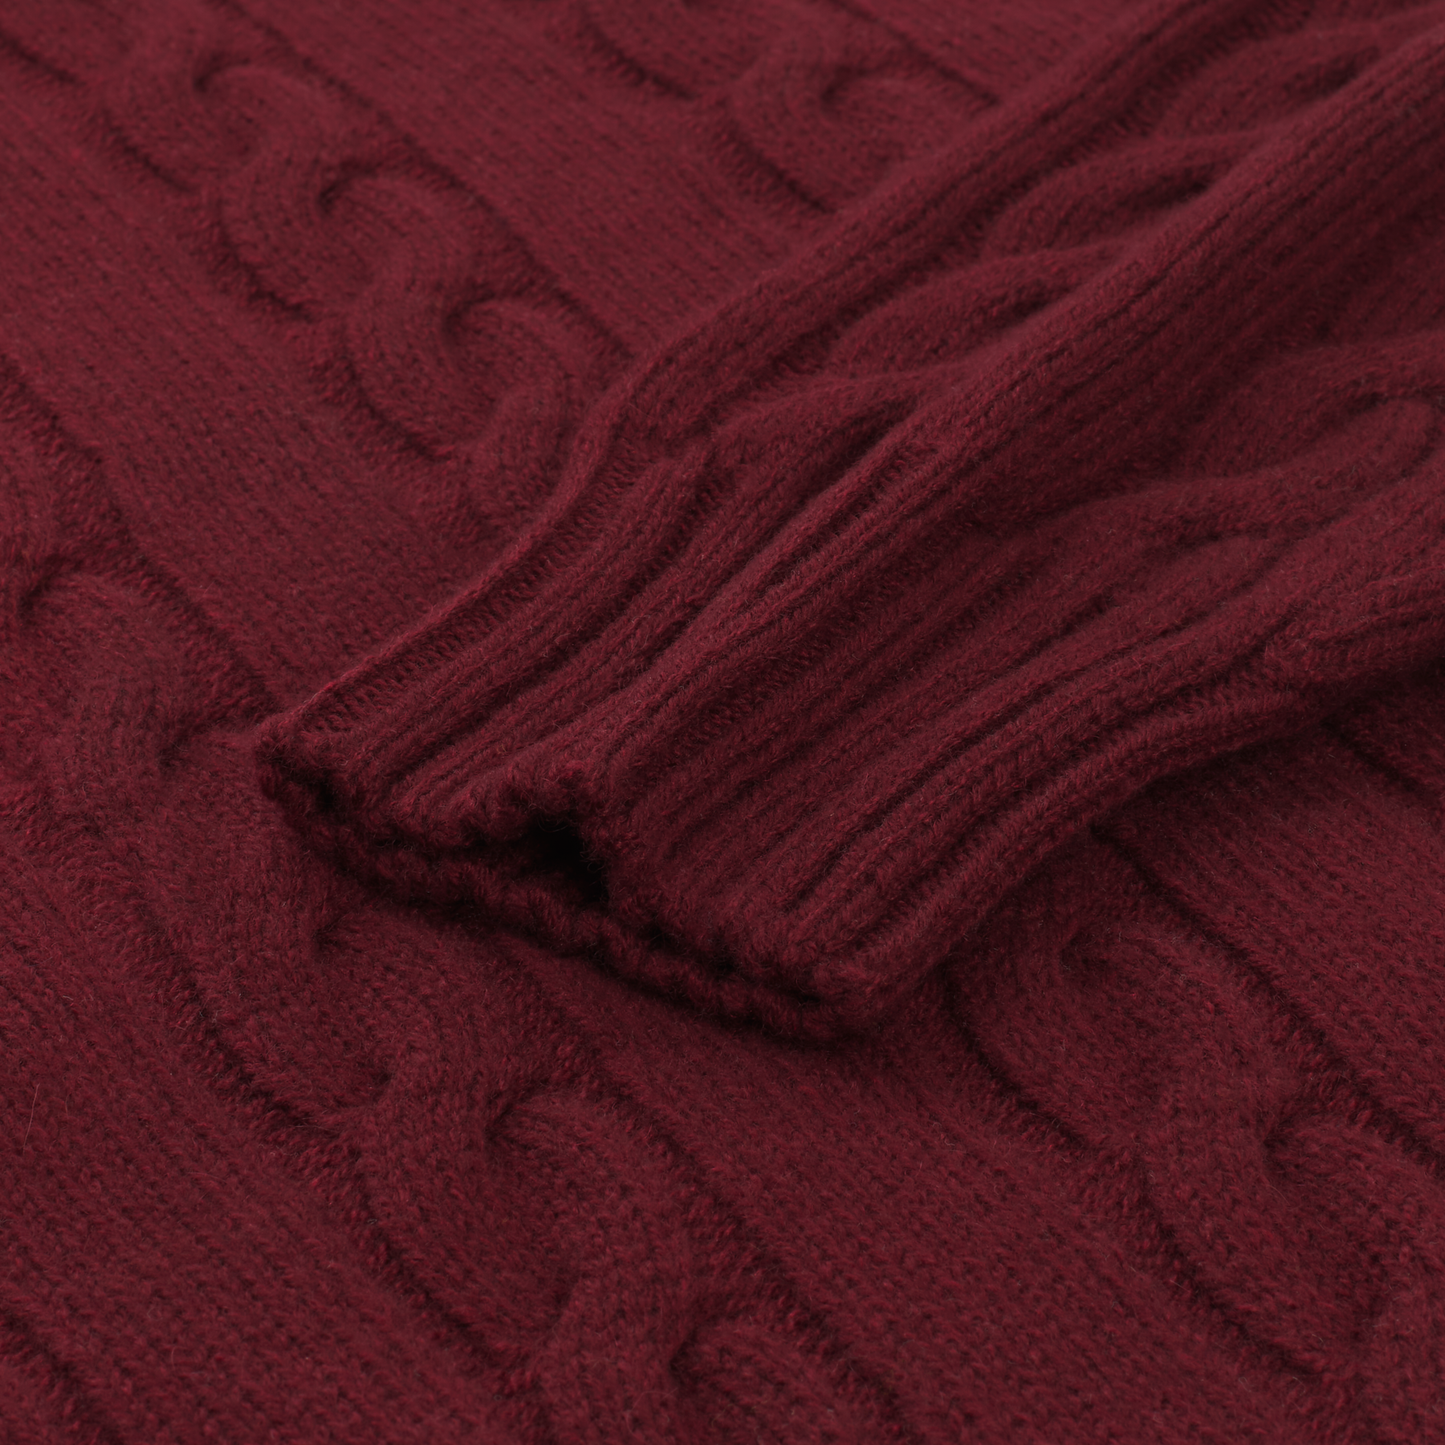 Luciano Barbera Turtleneck Cable-Knit Wool, Silk and Cashmere-Blend Sweater in Burgundy - SARTALE